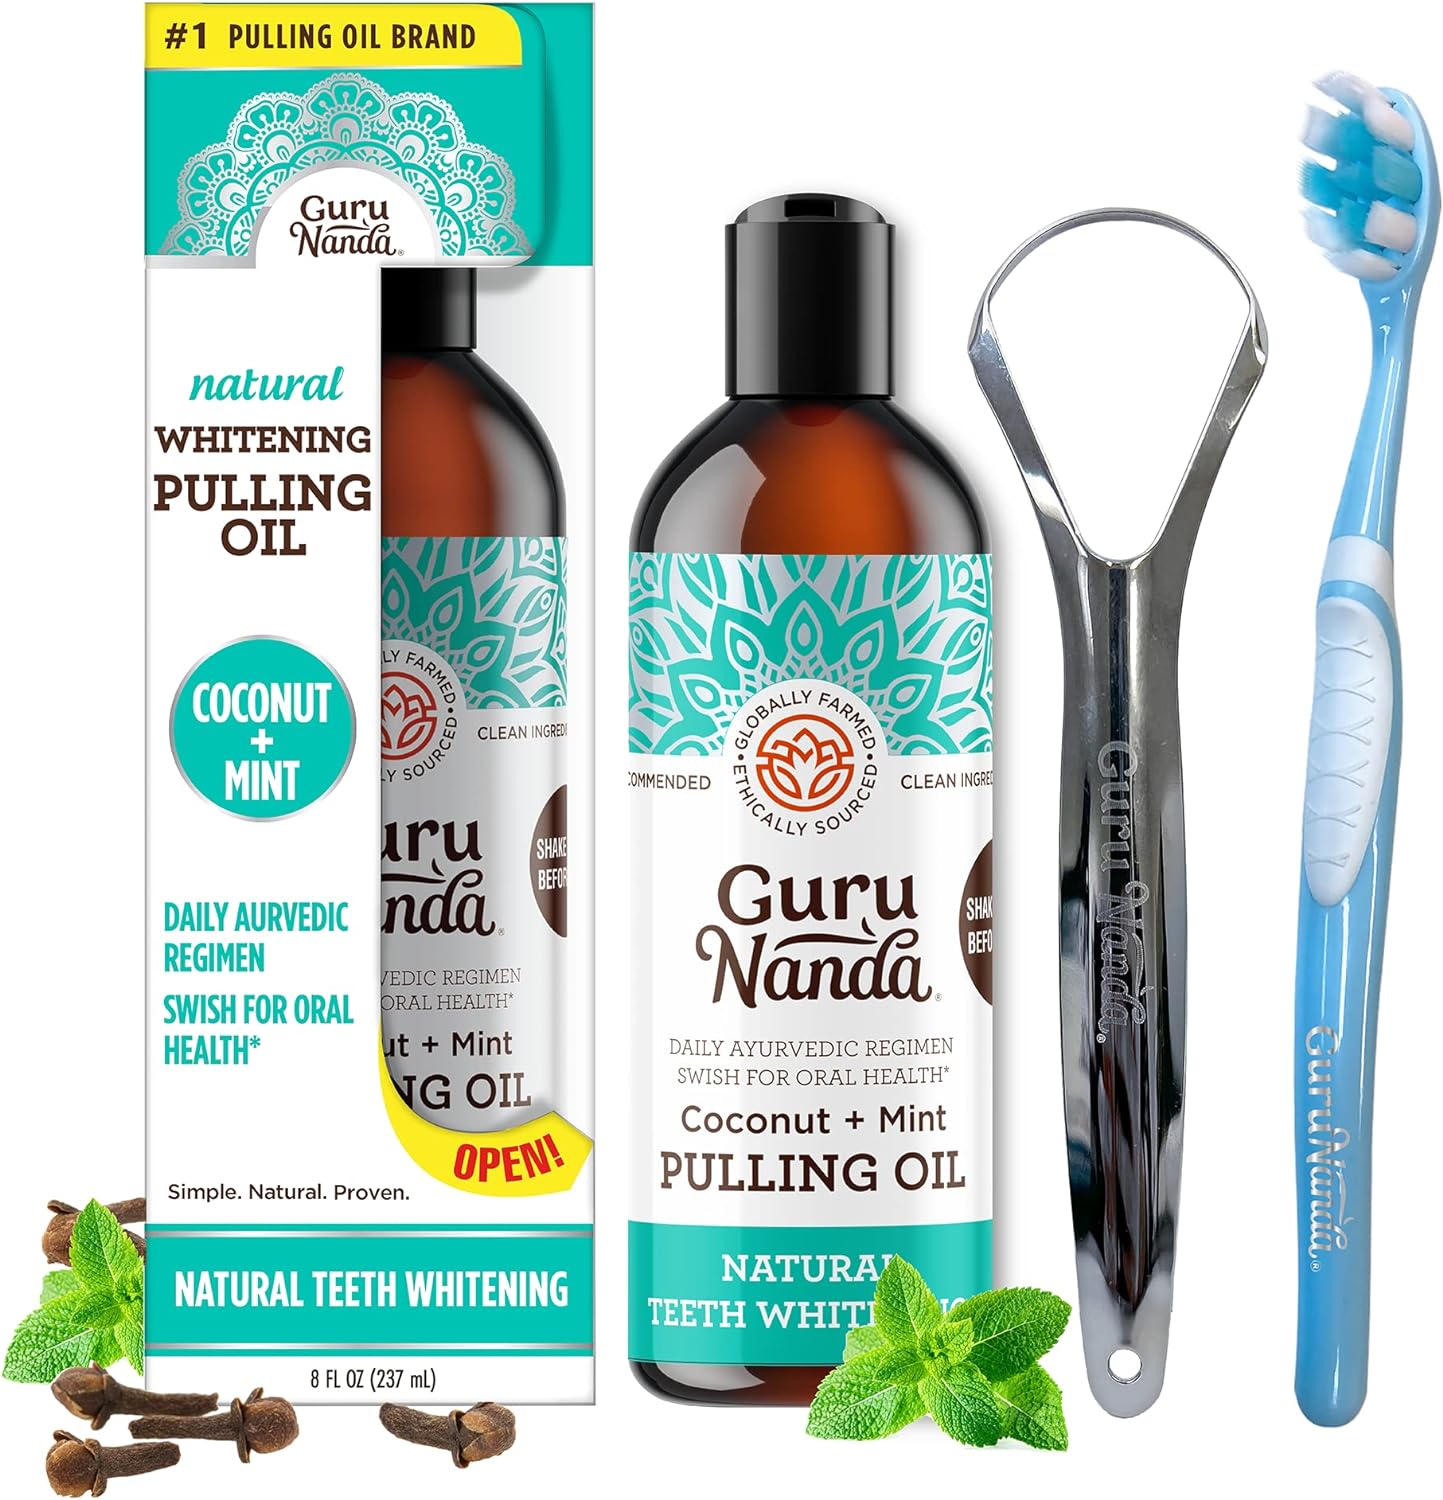 Natural Toothcare Toothpaste Whitening – Experience the Benefits of Coconut Oil Pulling